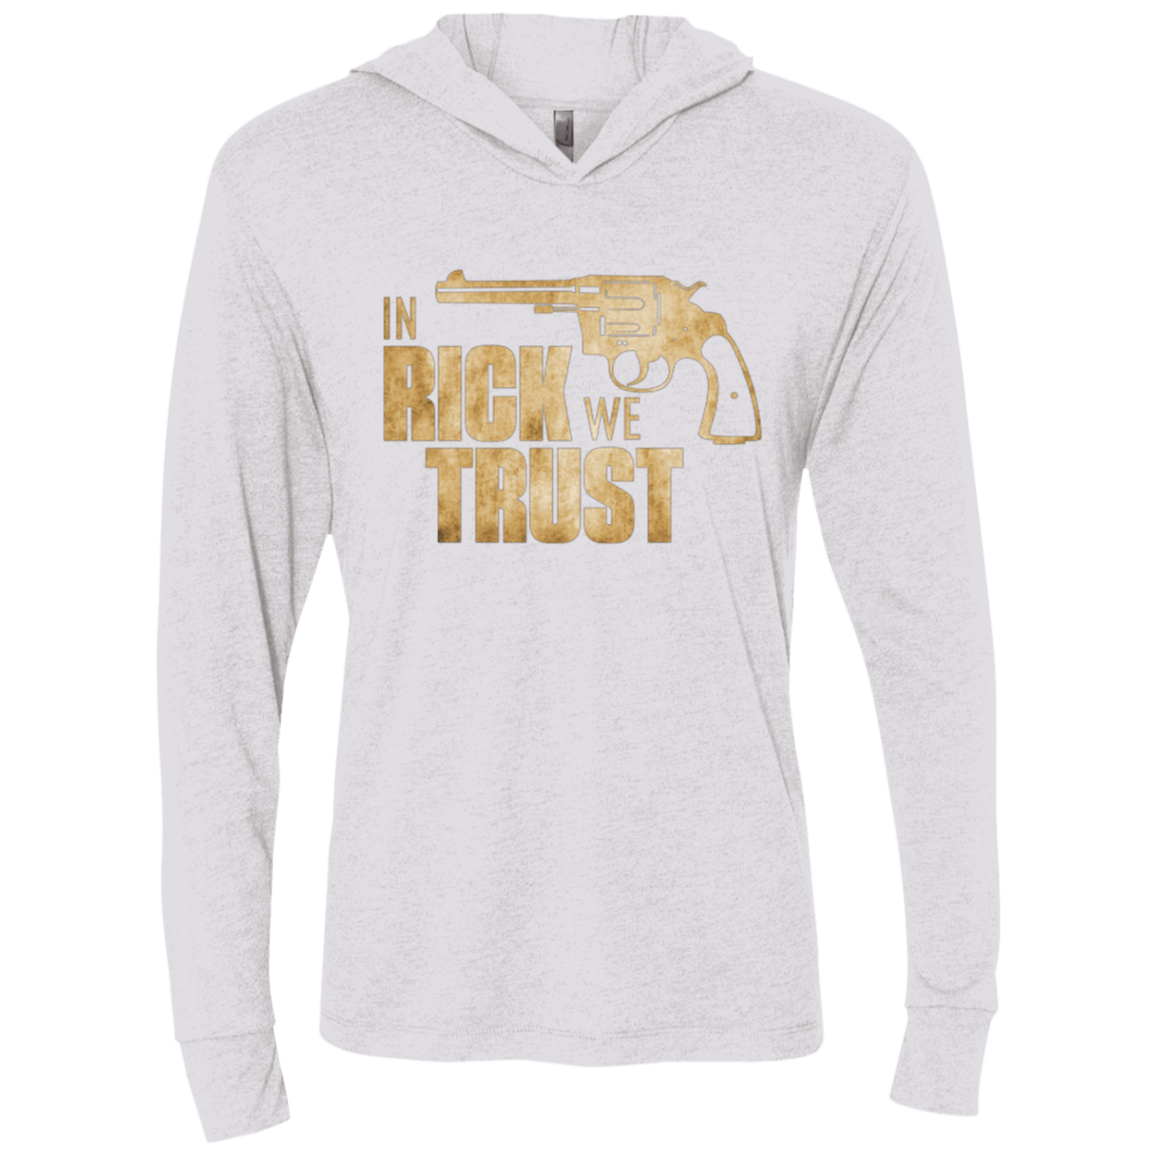 T-Shirts Heather White / X-Small In Rick We Trust Triblend Long Sleeve Hoodie Tee